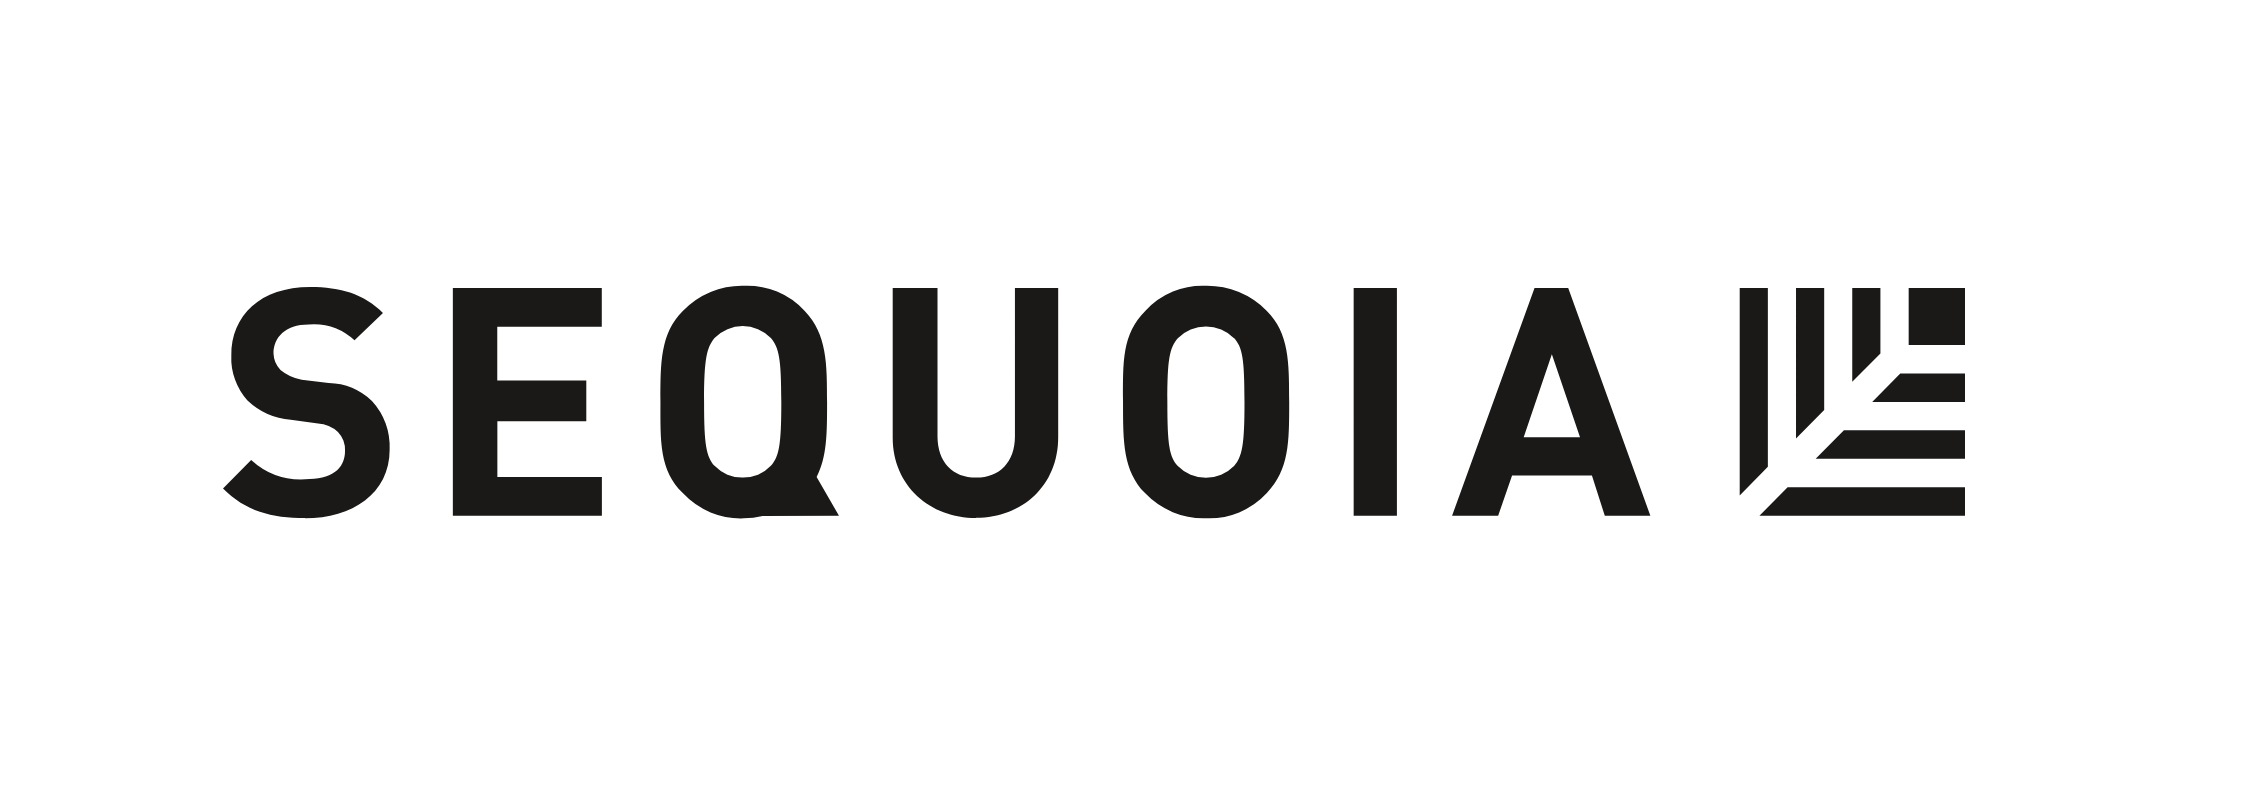 Sequoia Newsletter Cover Image